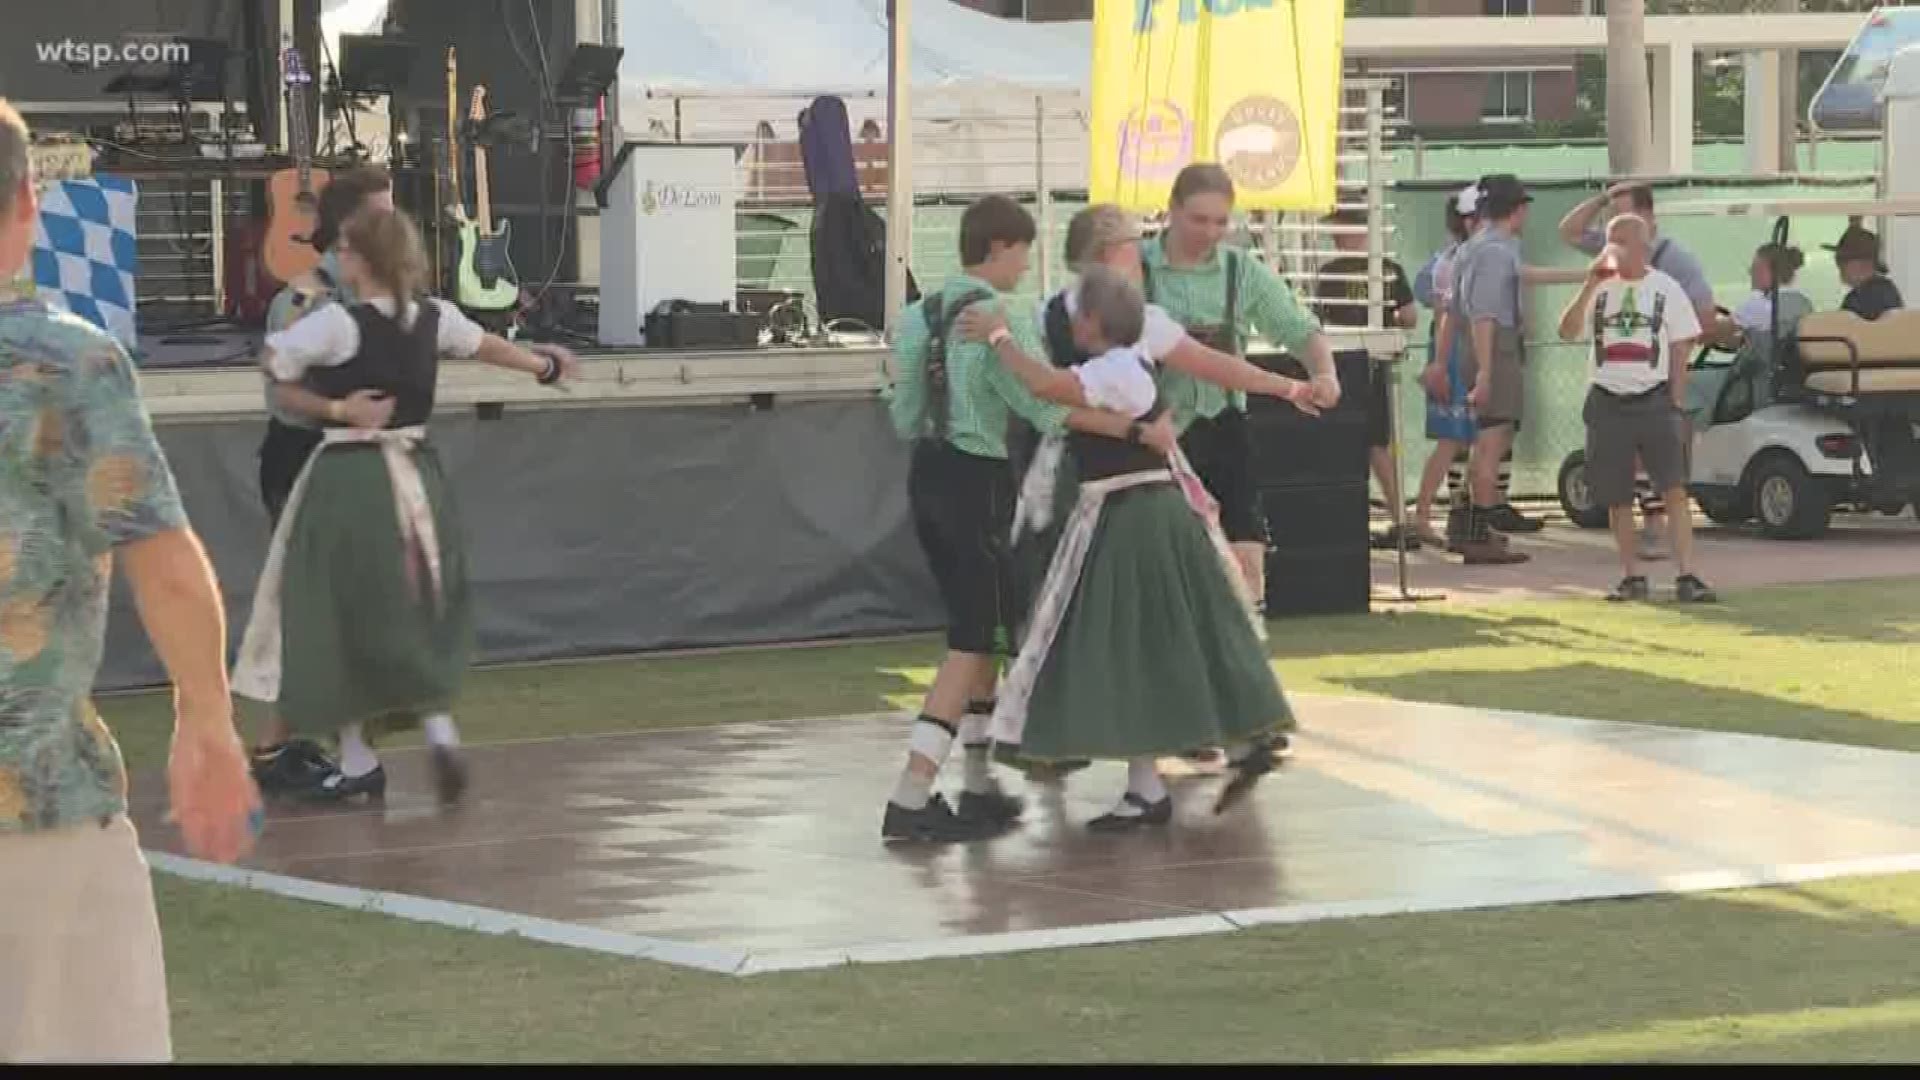 All weekend long you can enjoy Oktoberfest in downtown Tampa.